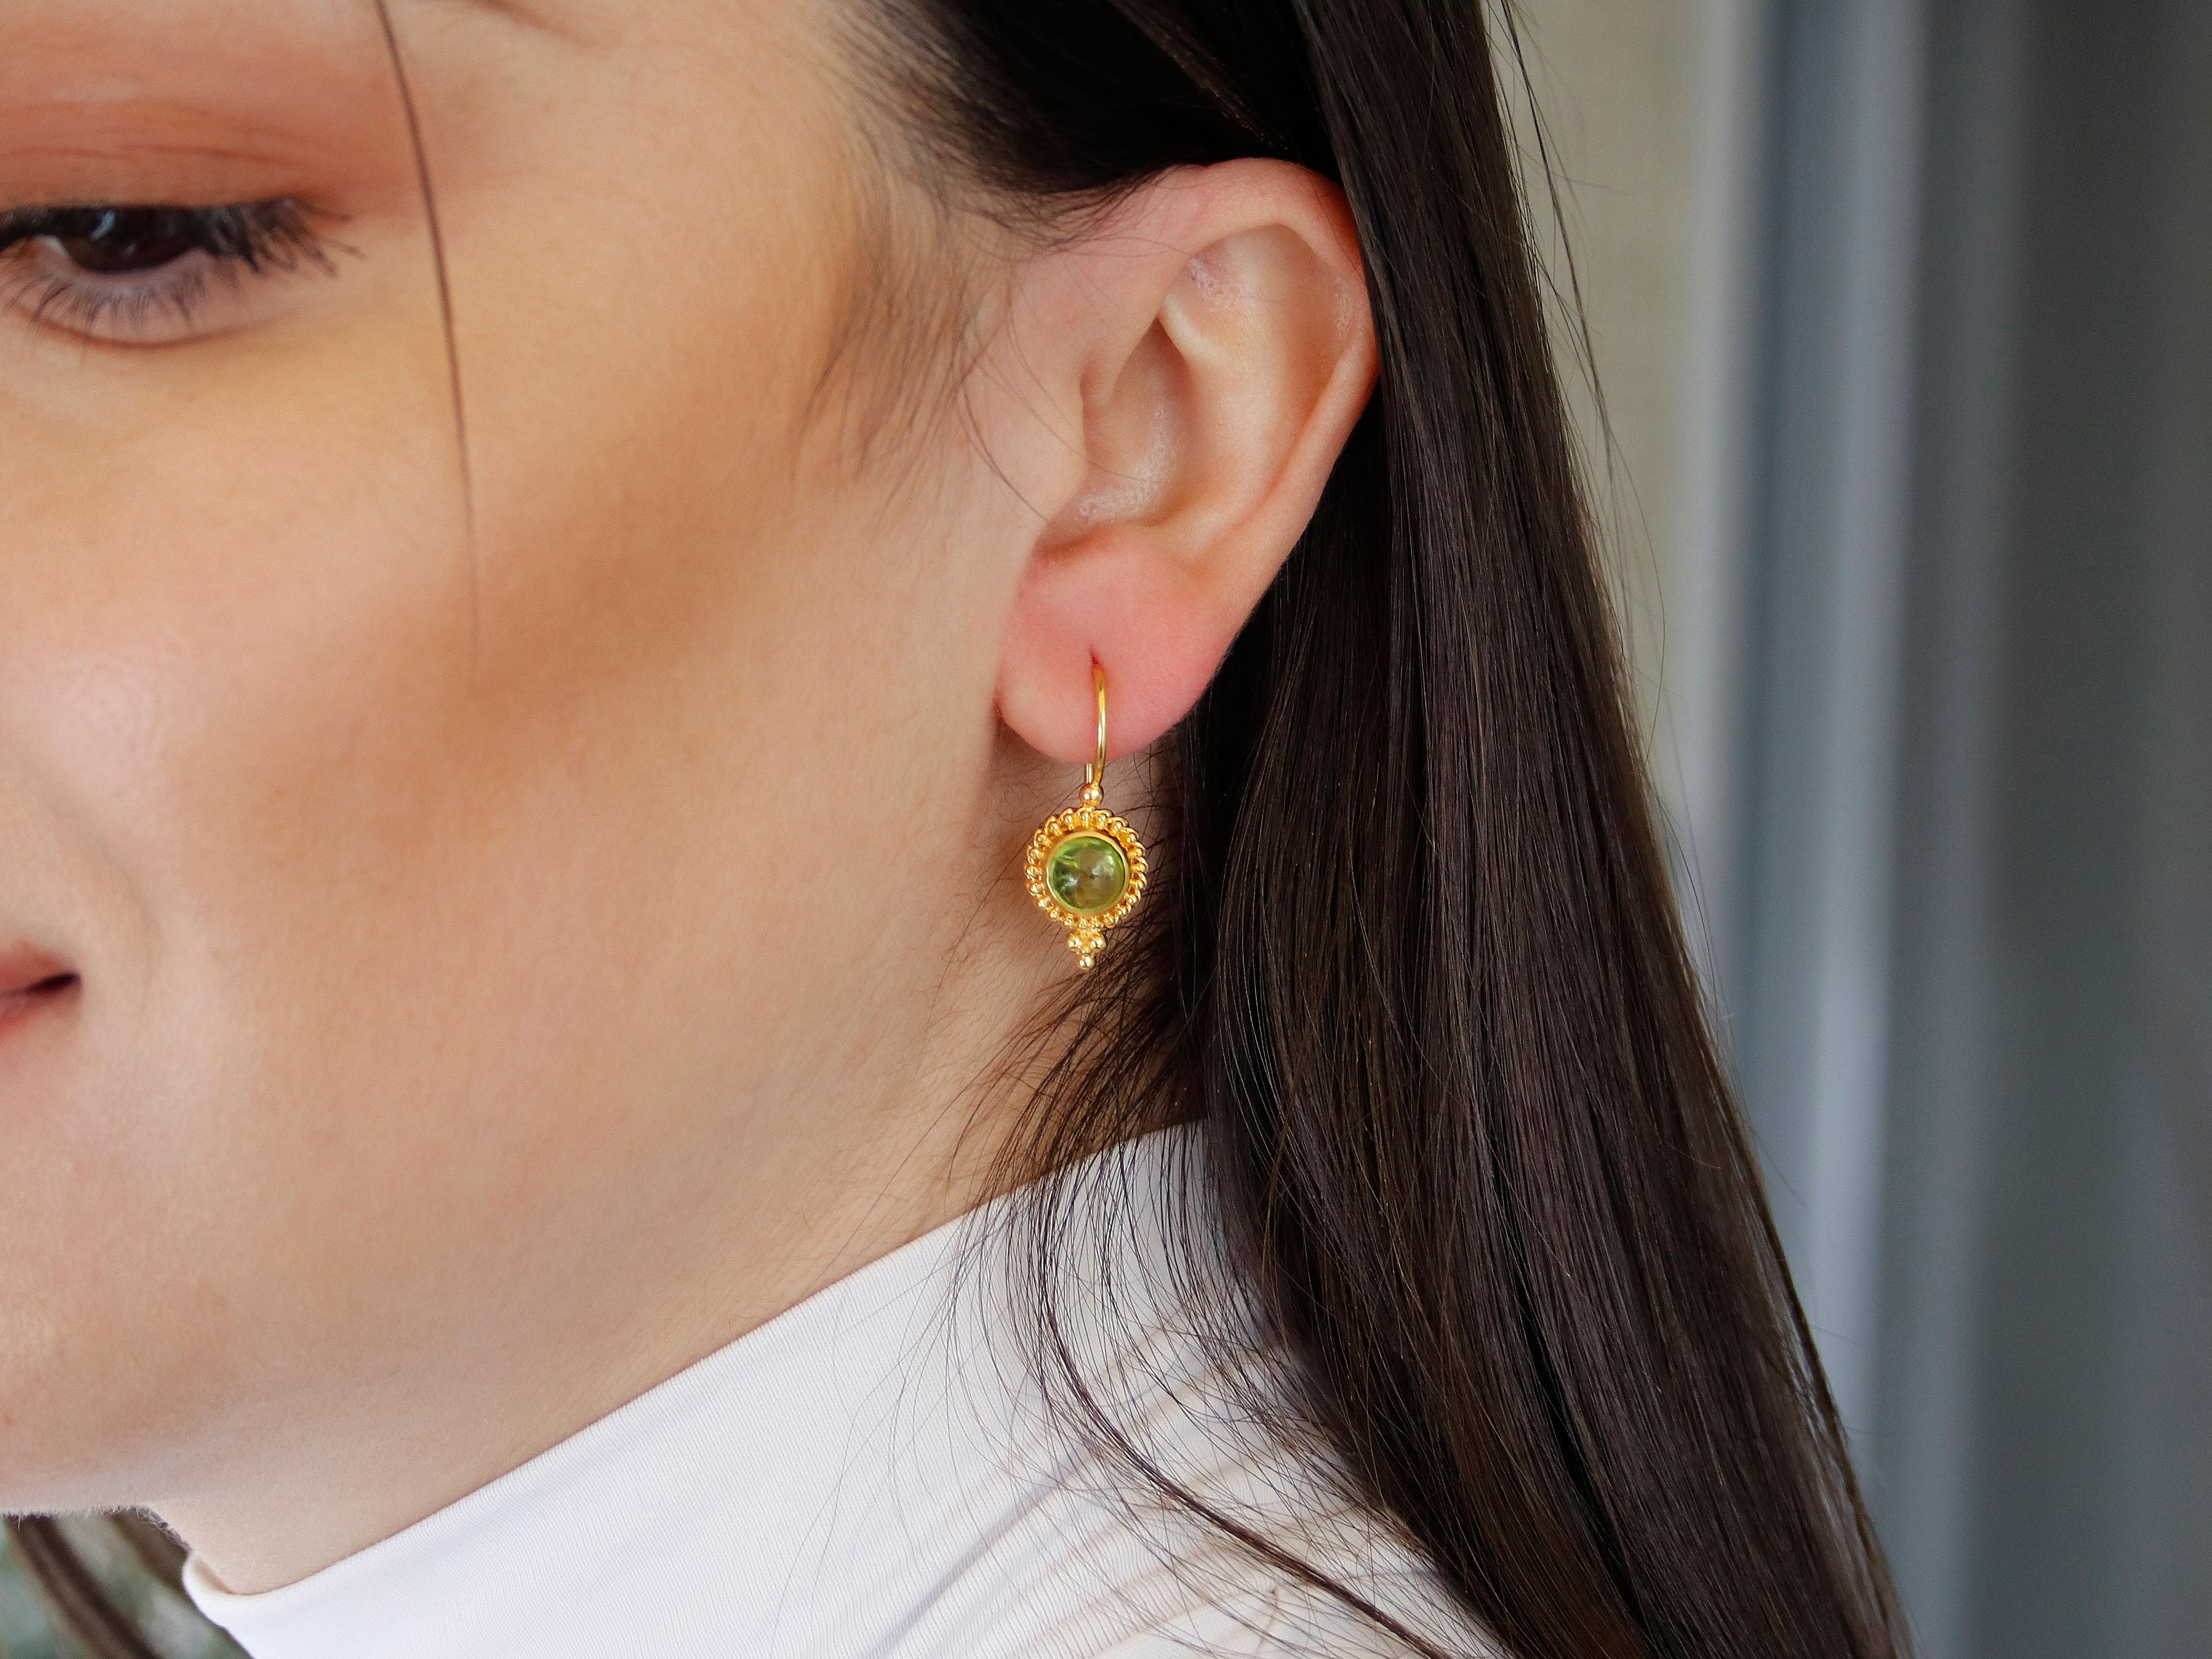 Elegant classic Greek earrings set in 18k yellow gold with beautiful peridot gemstones. The filigree and granulation decoration adds an intricate and elegant touch to the design, making them a perfect accessory for any formal occasion. The vibrant